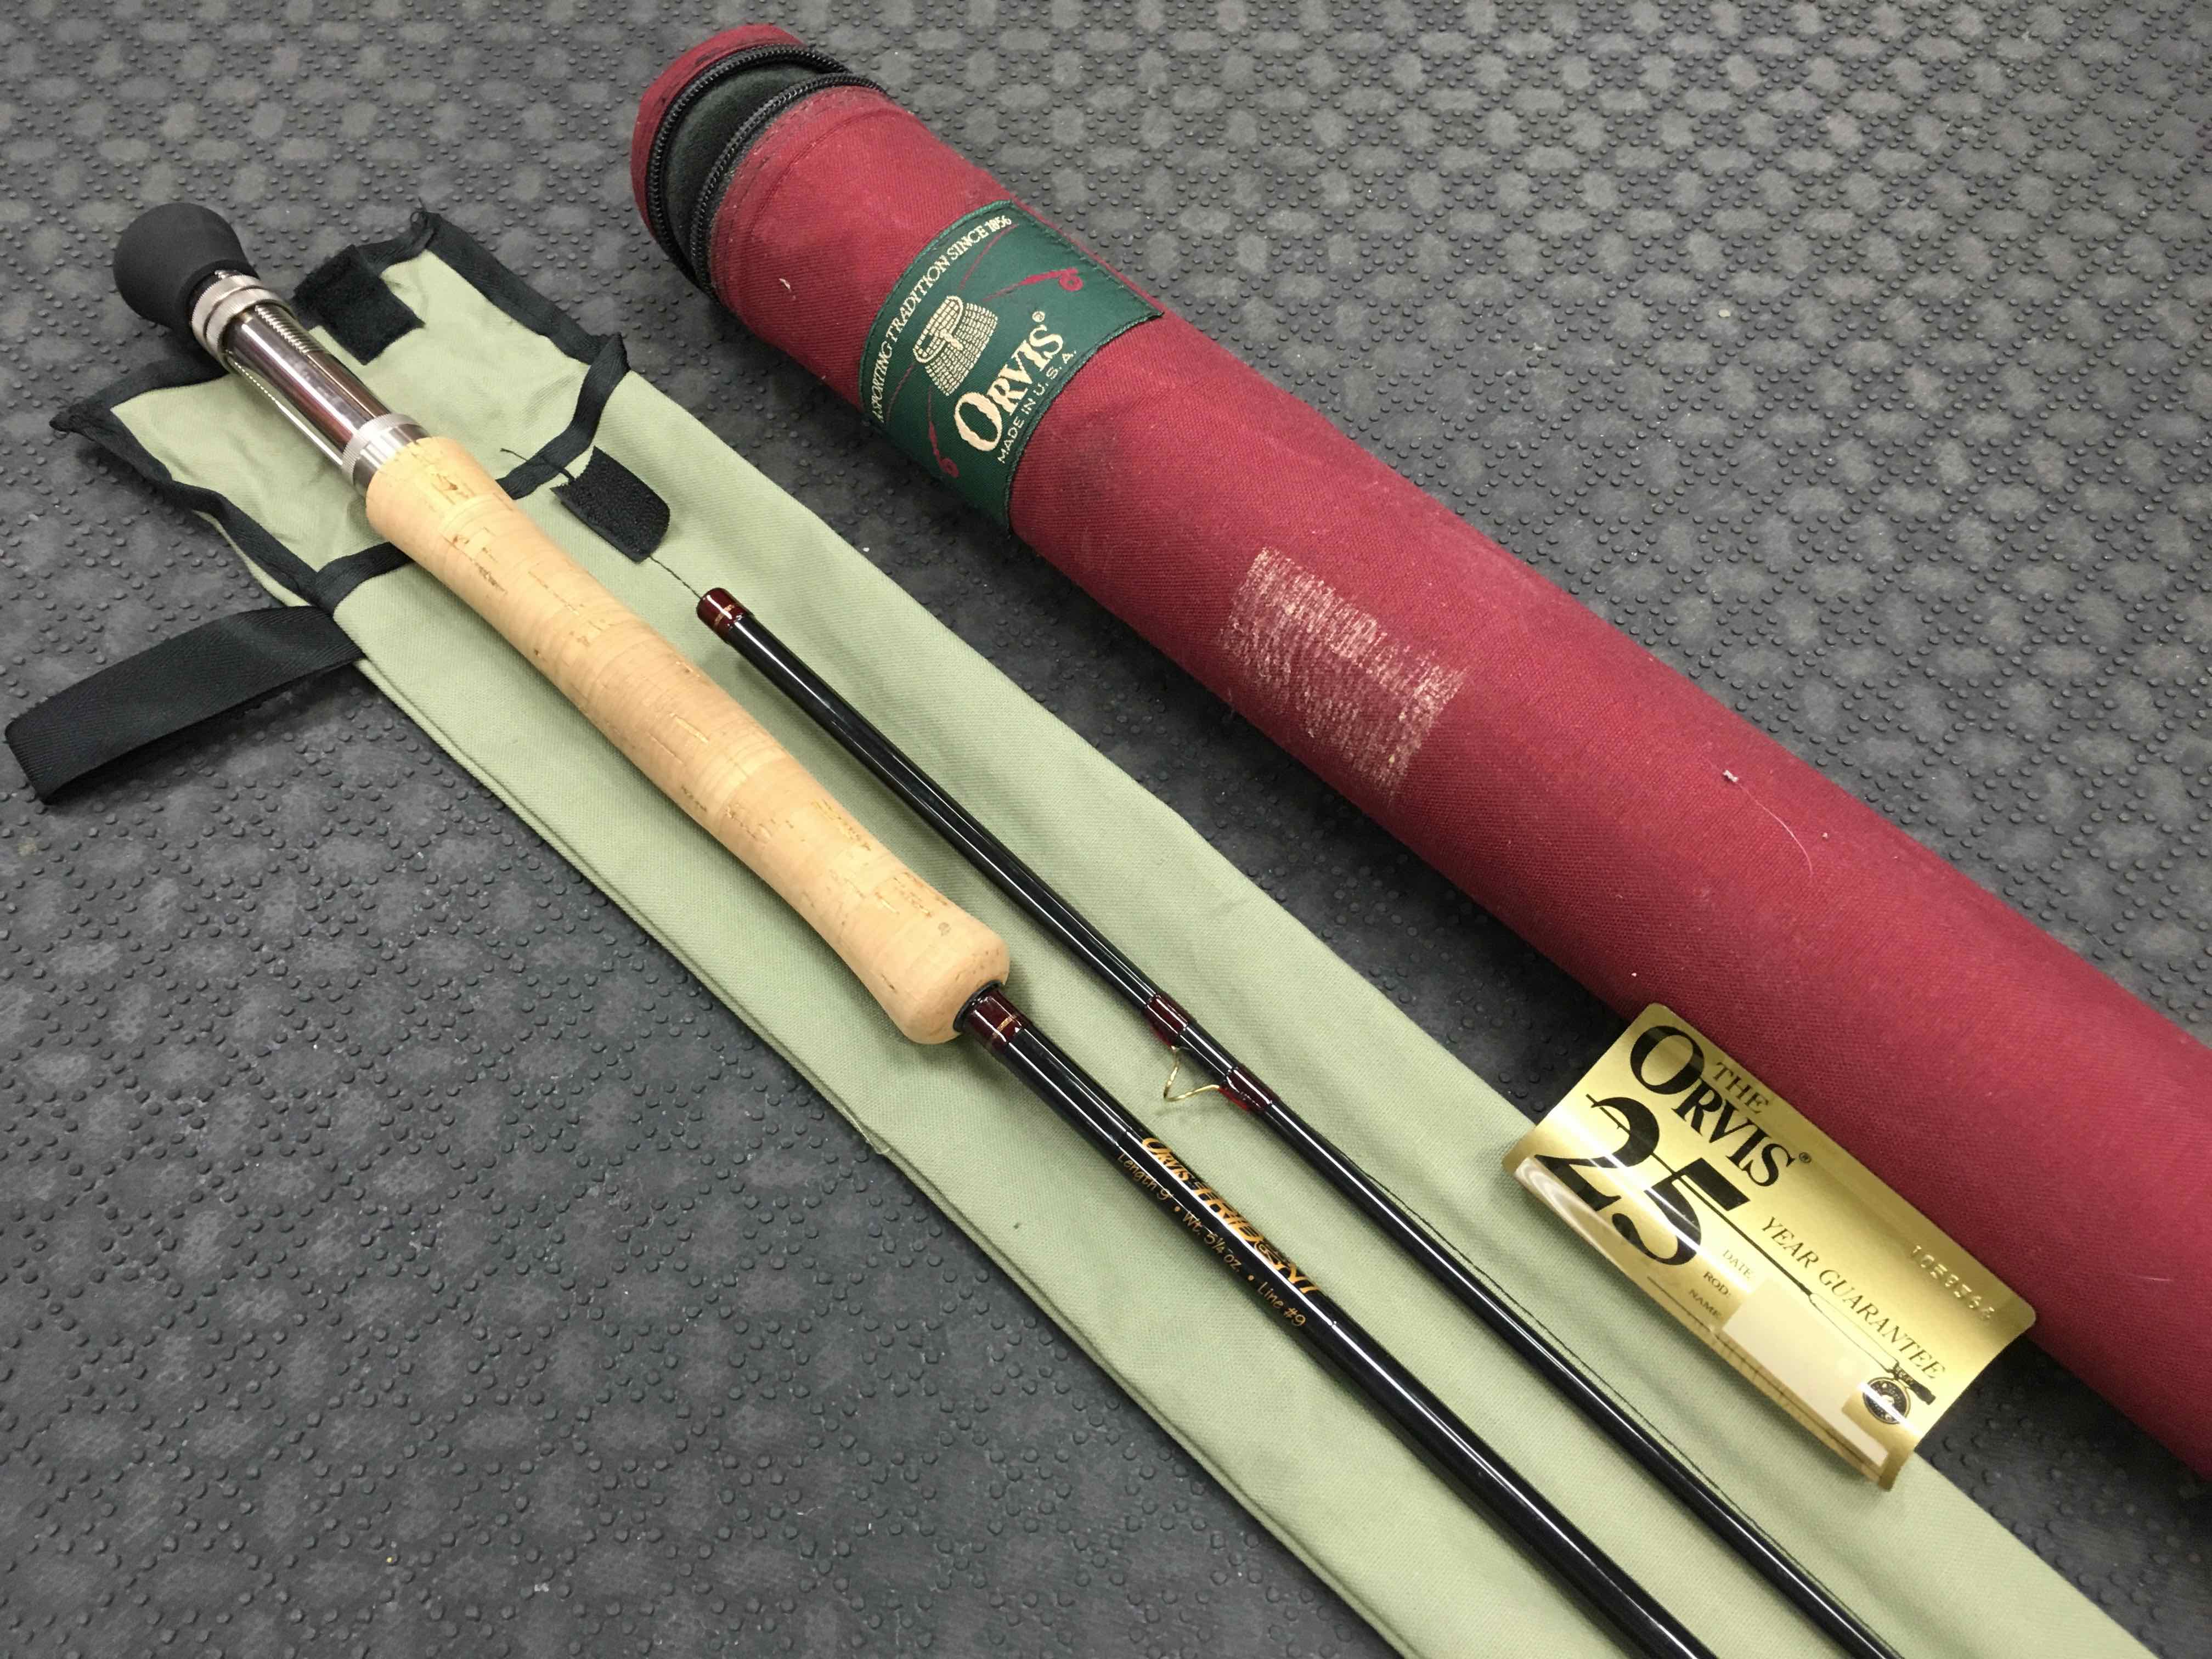 SOLD! – Orvis Trident Fly Rod – 909-2 – 9′ 9wt 2pc – 5 1/4oz